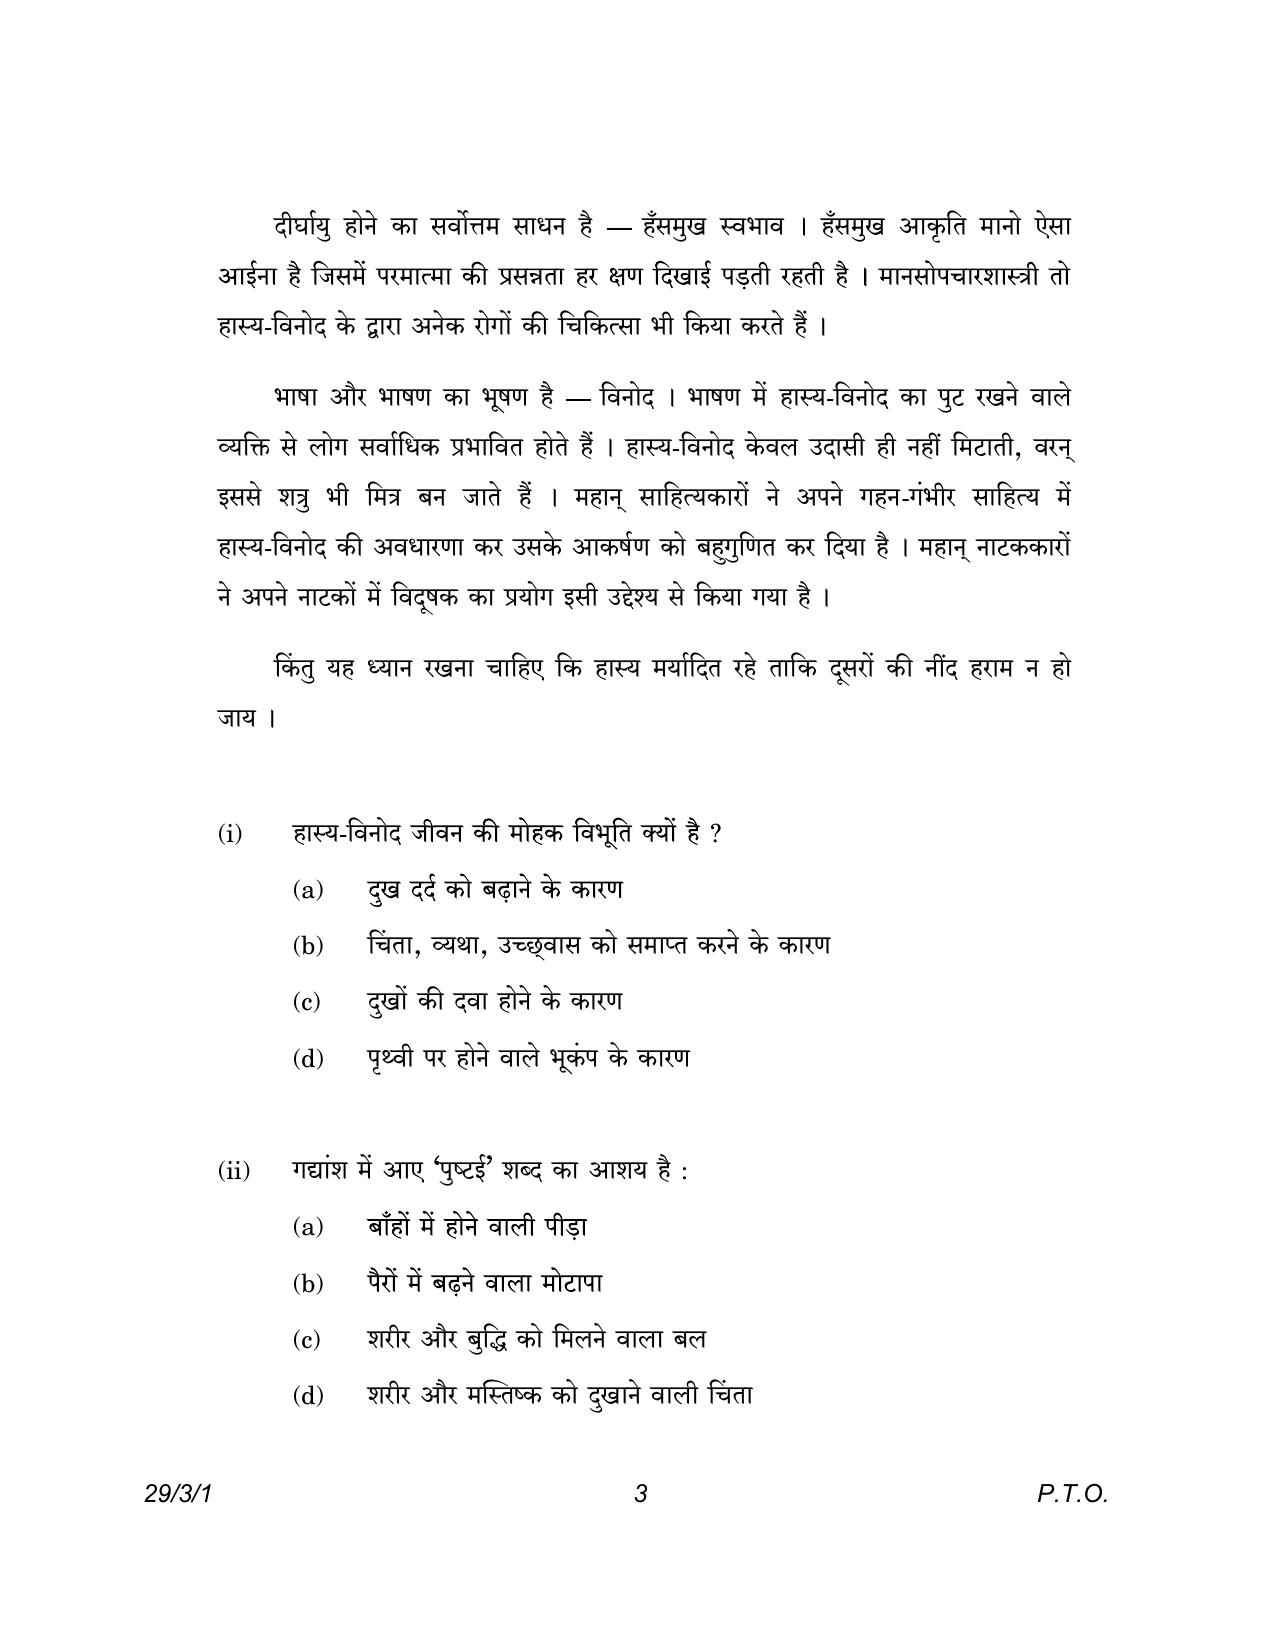 CBSE Class 12 29-3-1 Hindi Elective 2023 Question Paper - Page 3